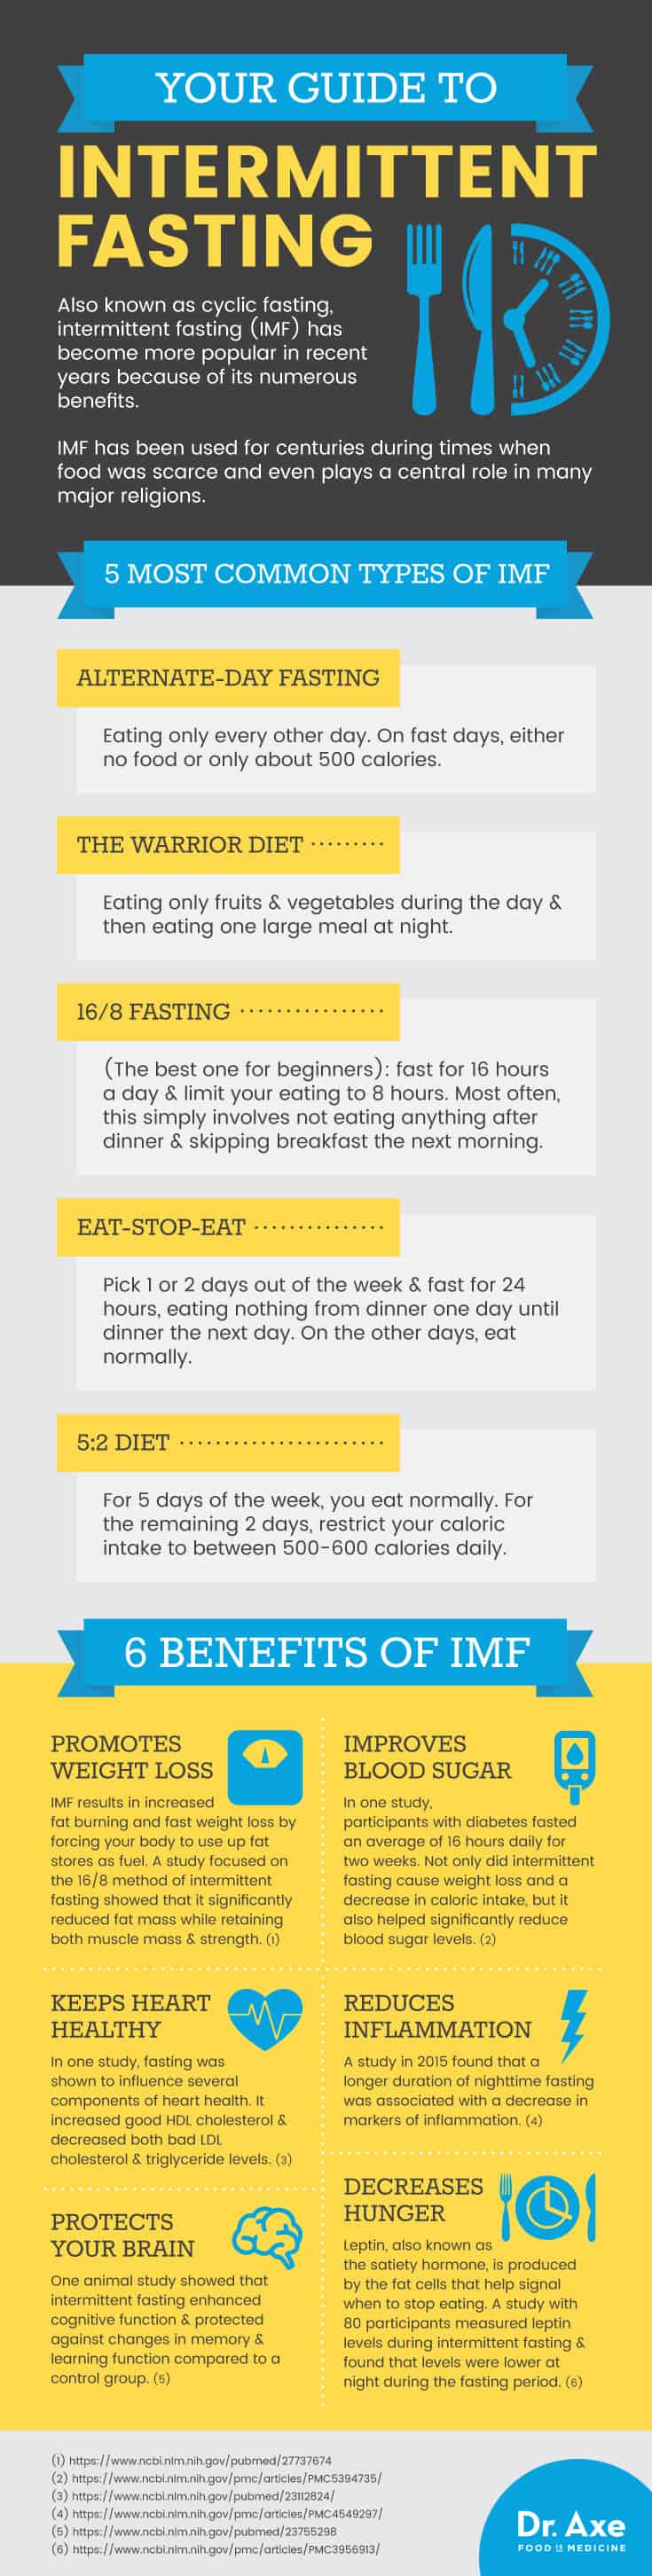 Intermittent fasting guide - Dr. Axe